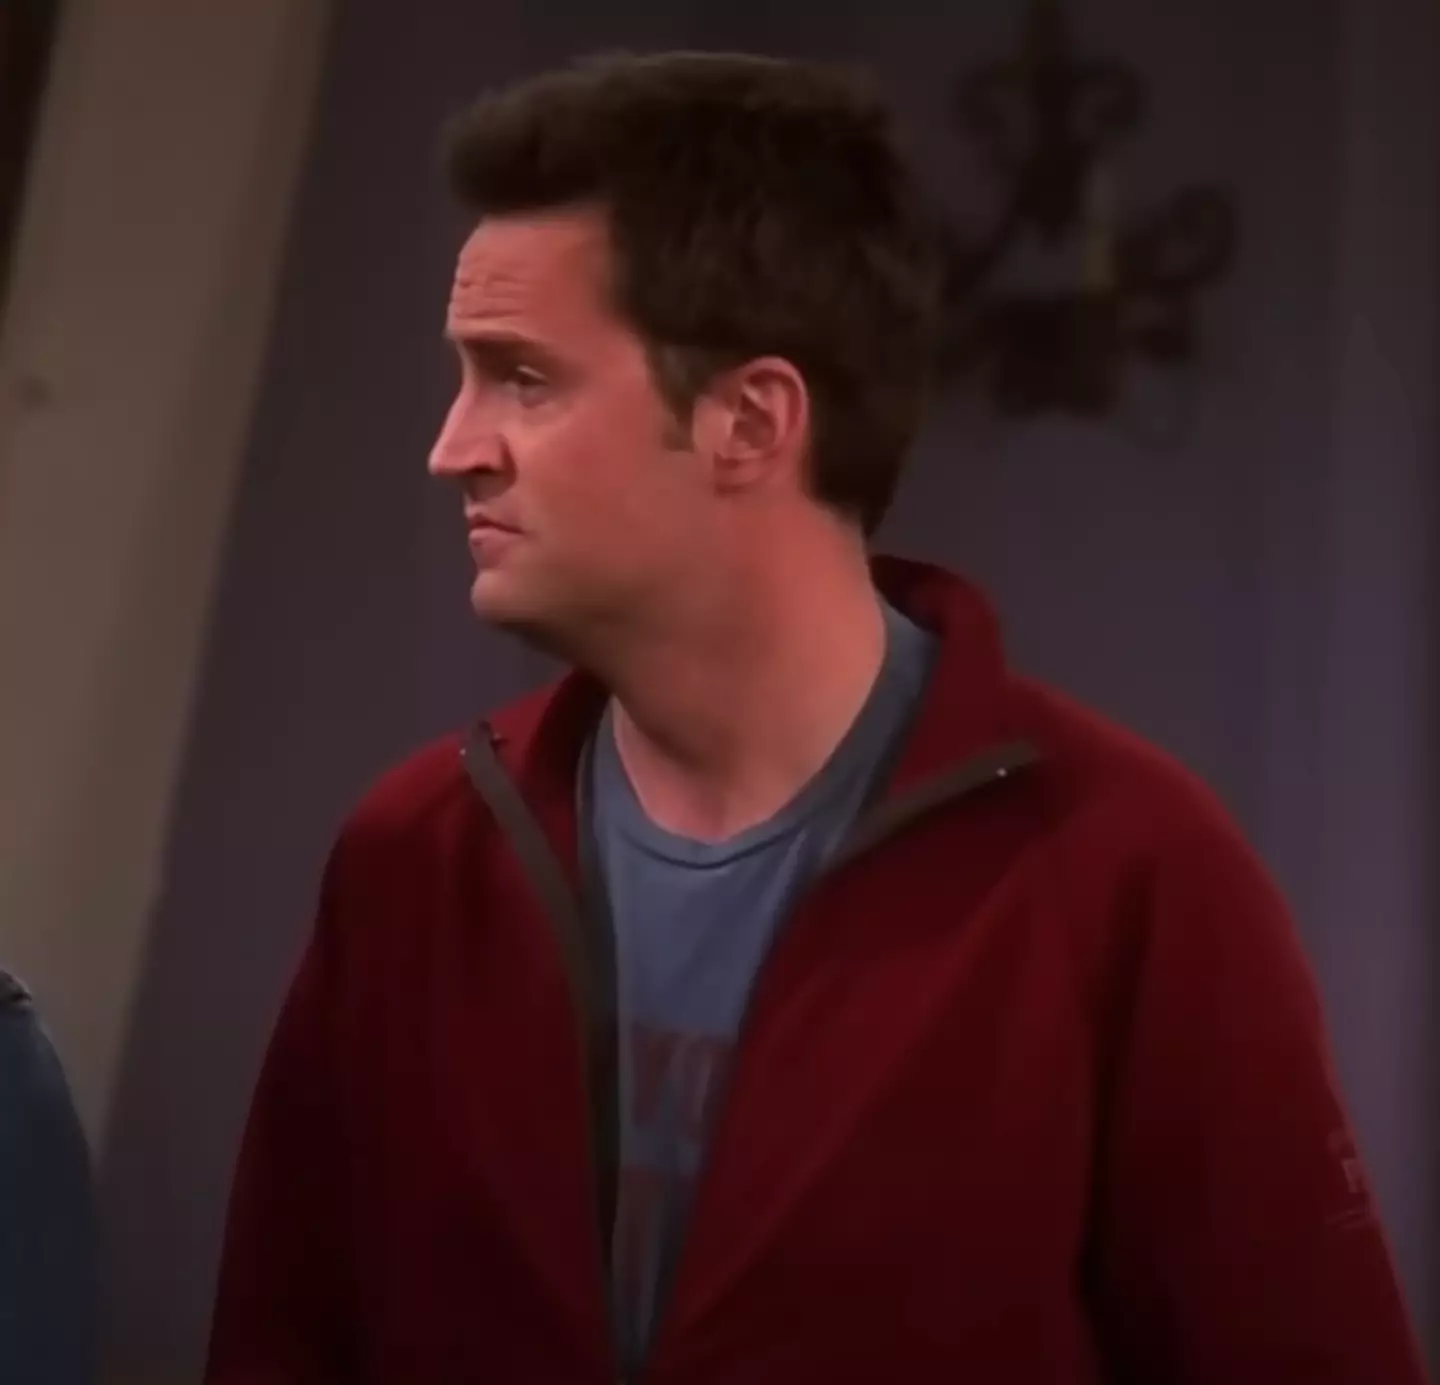 Fans are emotional after watching Chandler's final line following Matthew Perry's death.